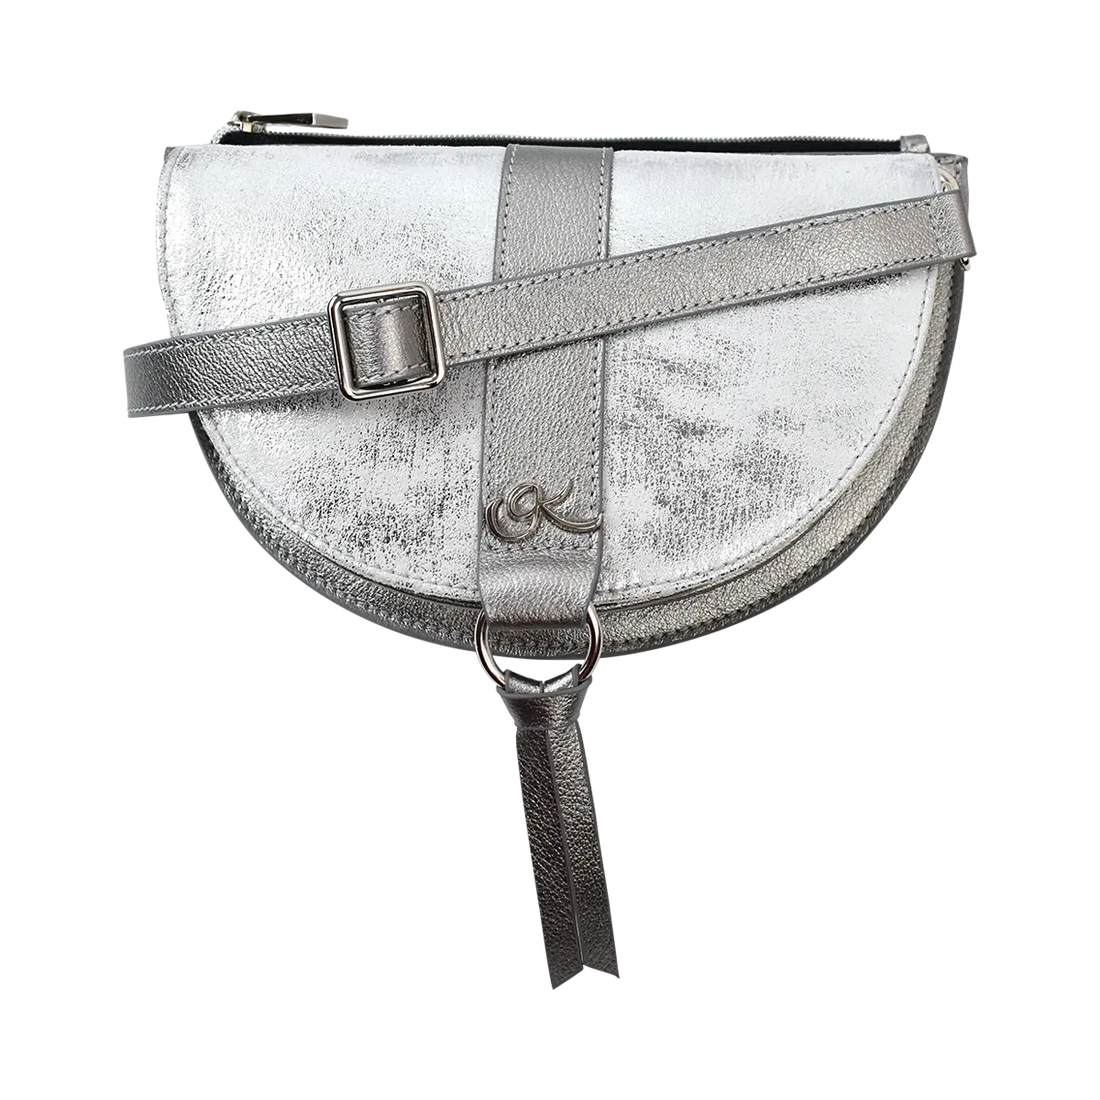 platinum leather crossbody bag and fanny pack. Accessory for women in San Diego, CA.